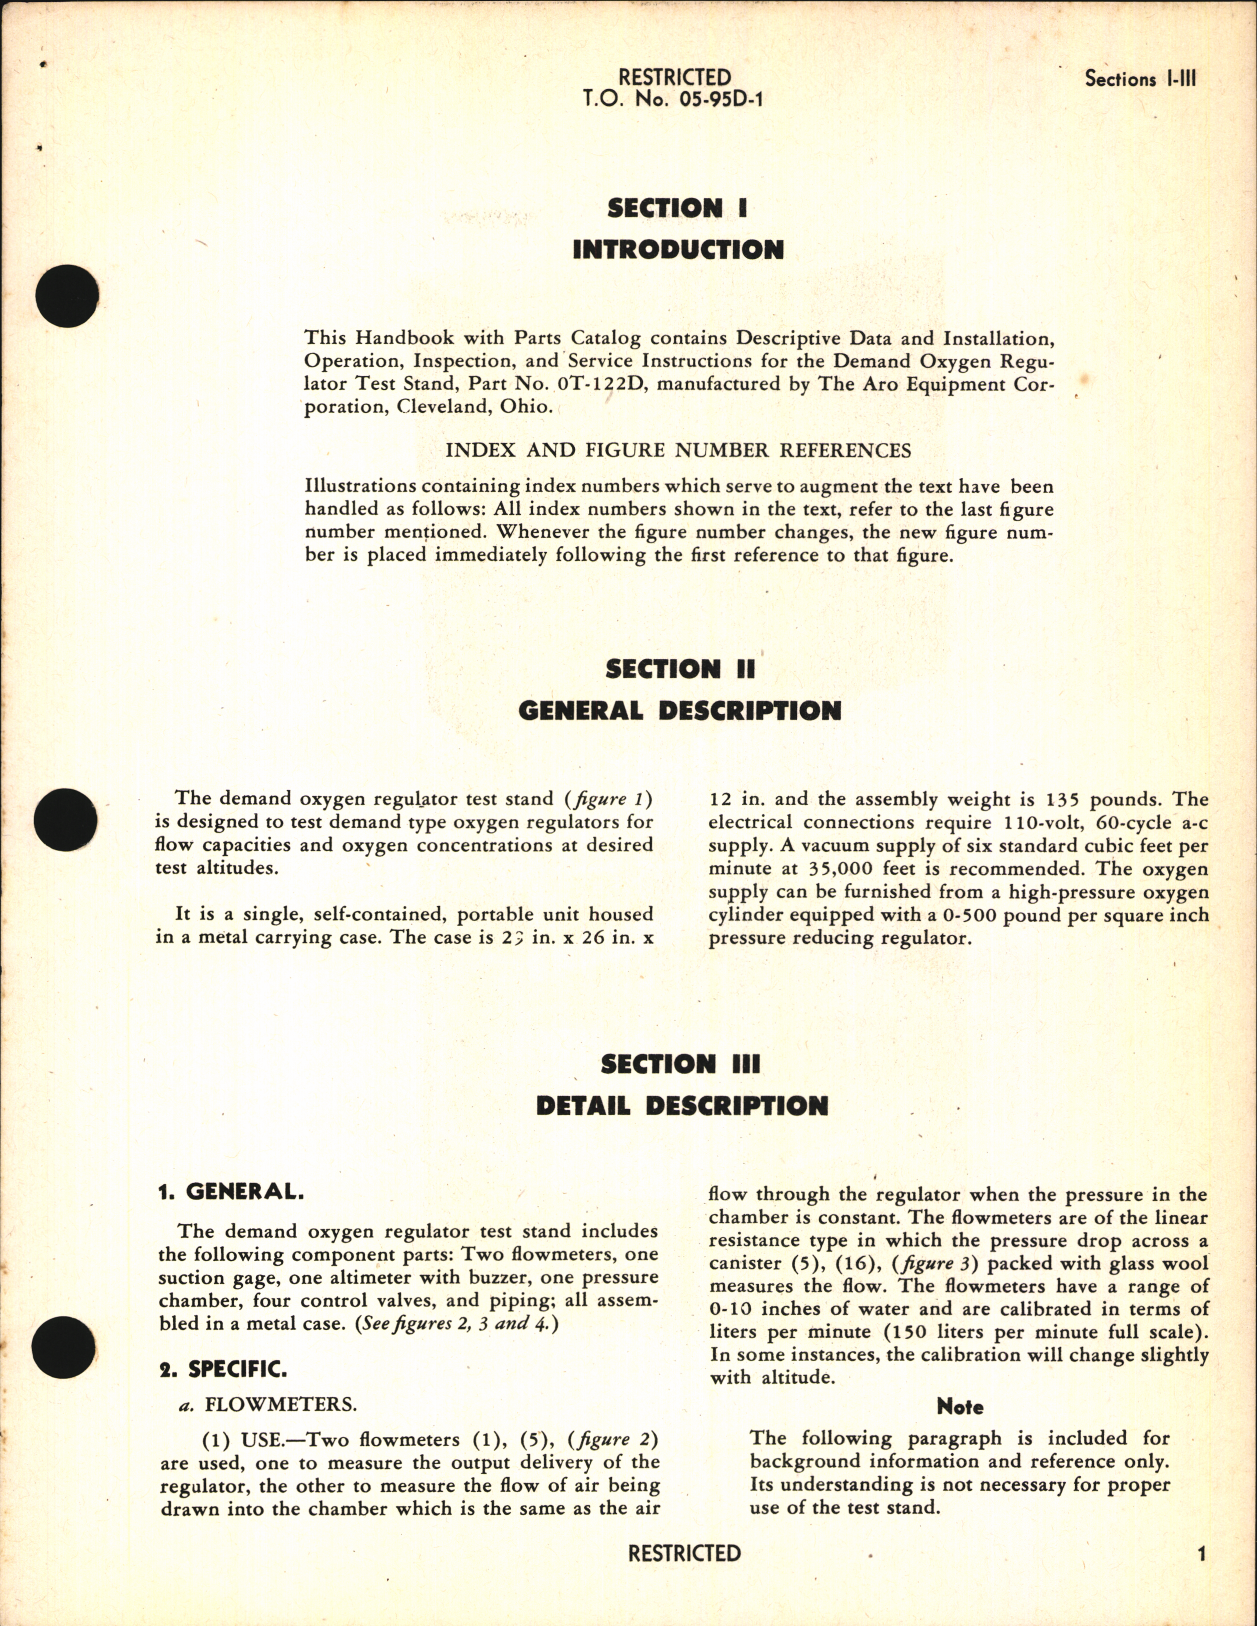 Sample page 5 from AirCorps Library document: Operation, Service and Overhaul Instructions with Parts Catalog for Demand Oxygen Regulator Test Stand Part No. OT-122D